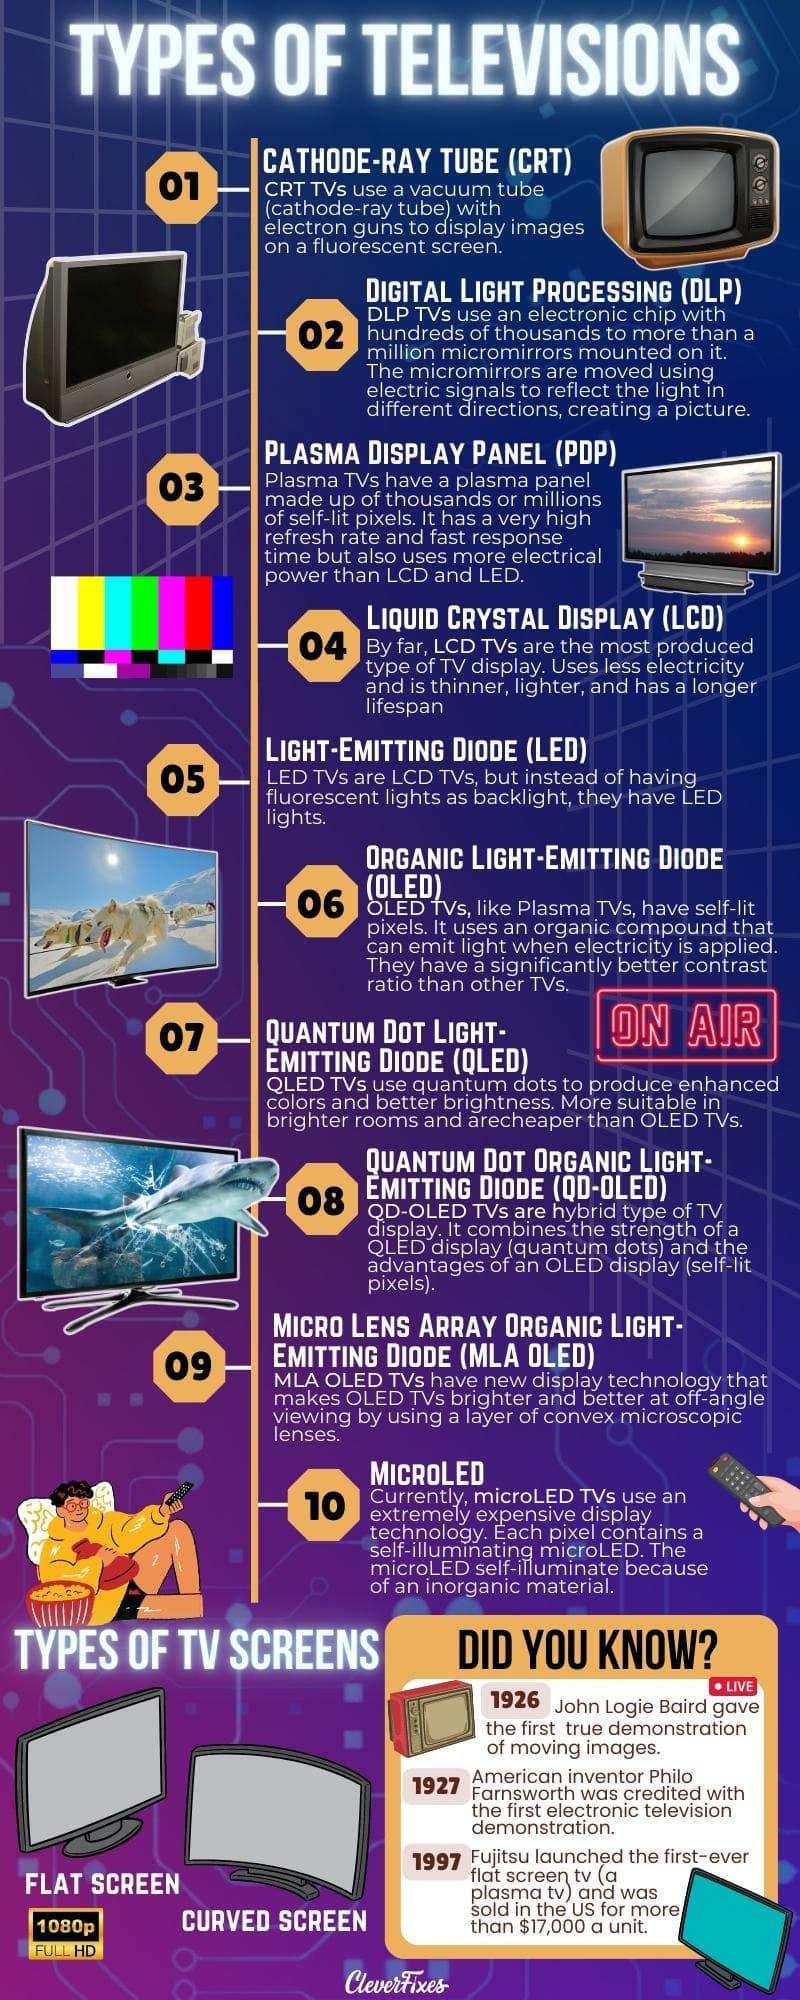 Chart of the different types of TV with images, name, description, and facts